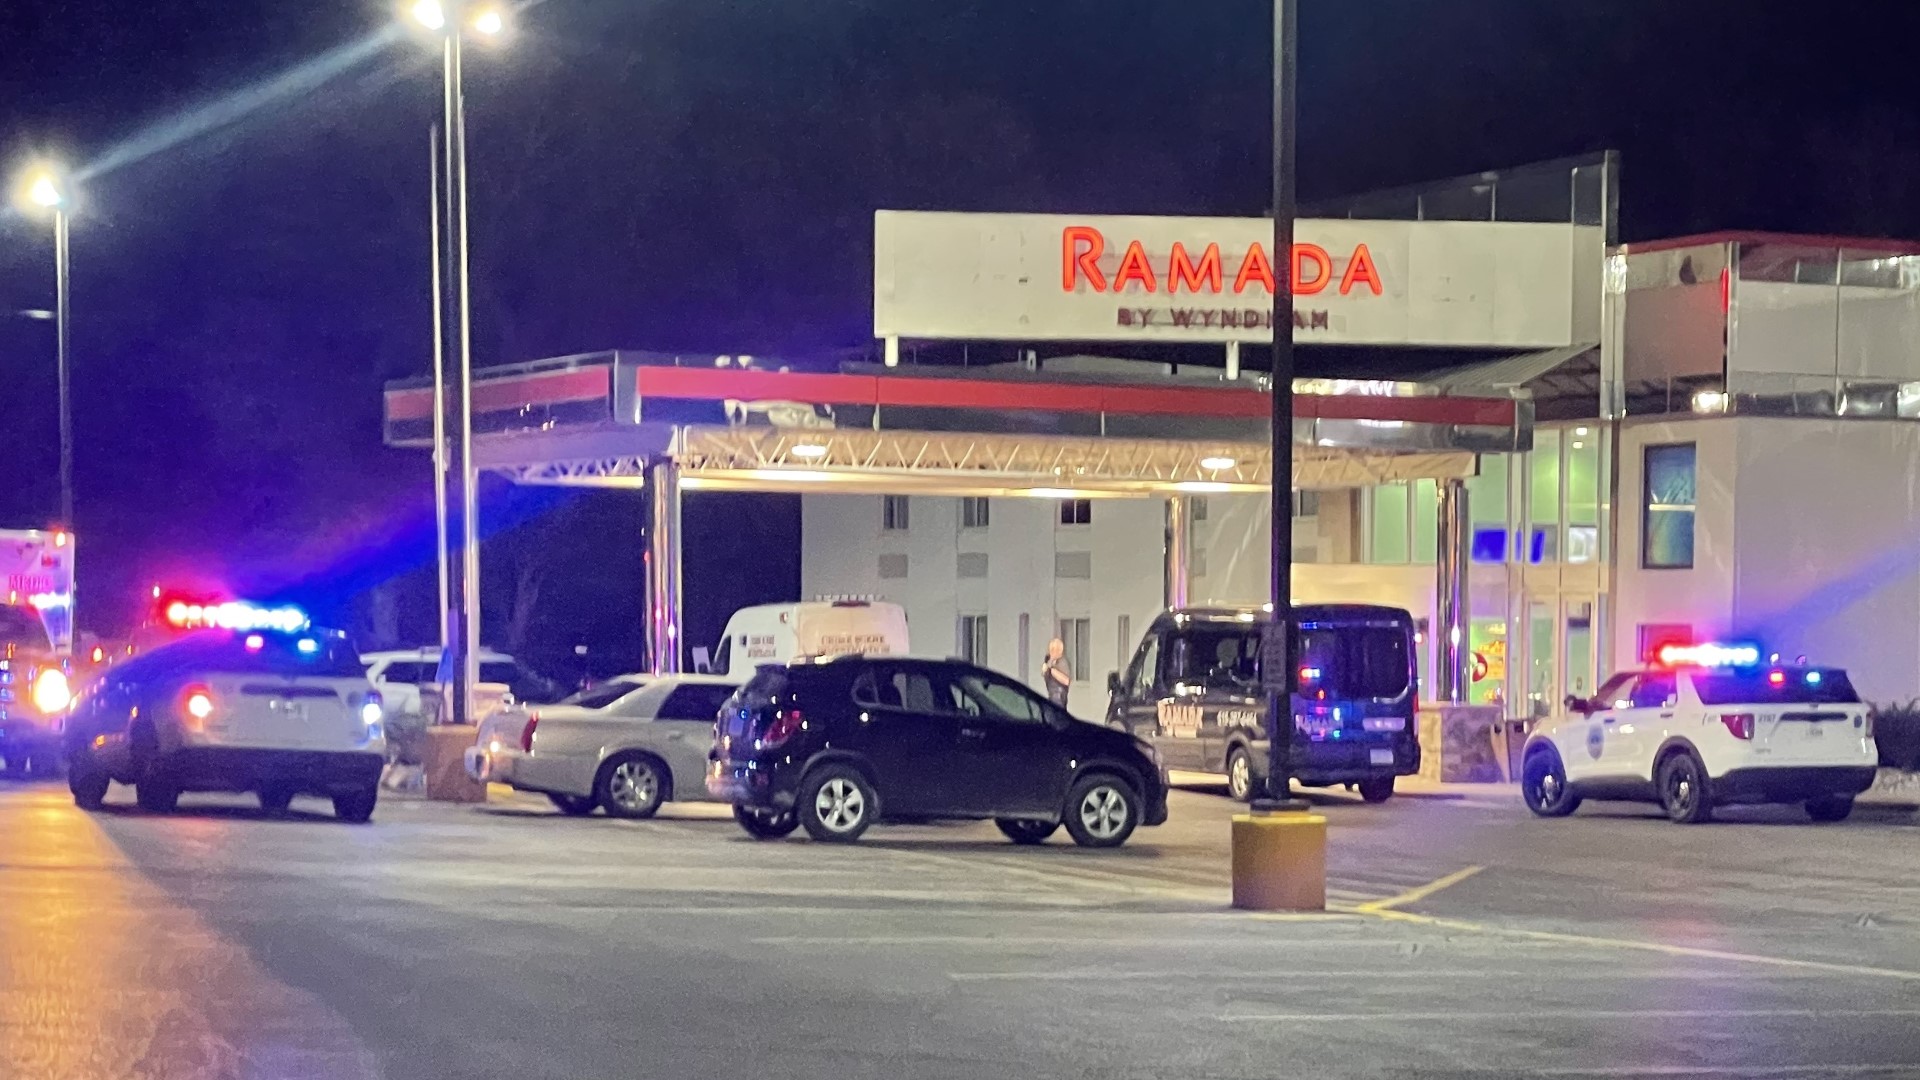 Police responded to a report of a shooting in the Ramada by Wyndham near the Des Moines International Airport at approximately 4:30 a.m. Wednesday.